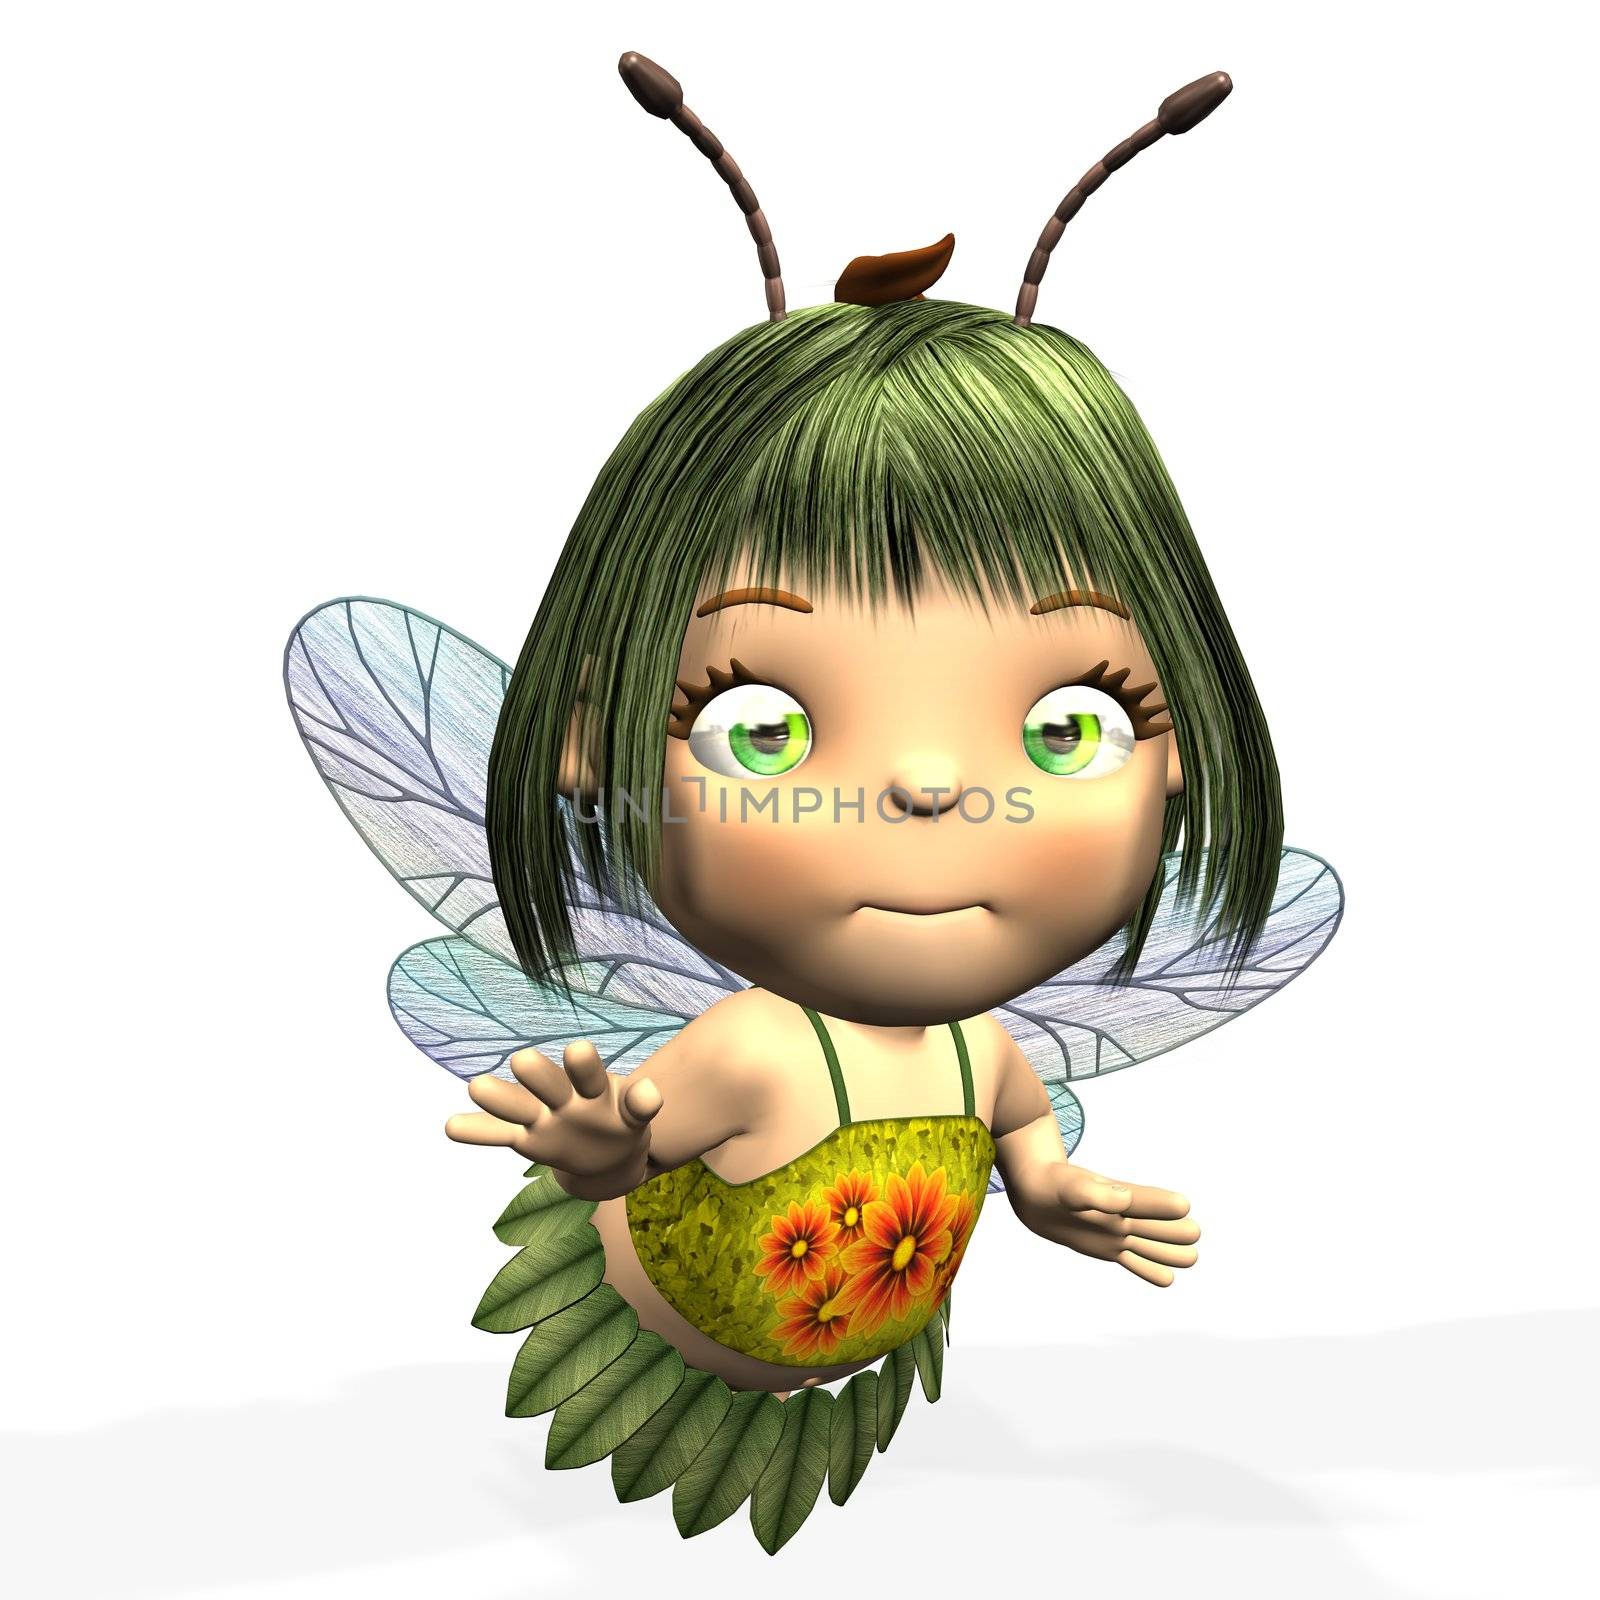 render of a toon fairy